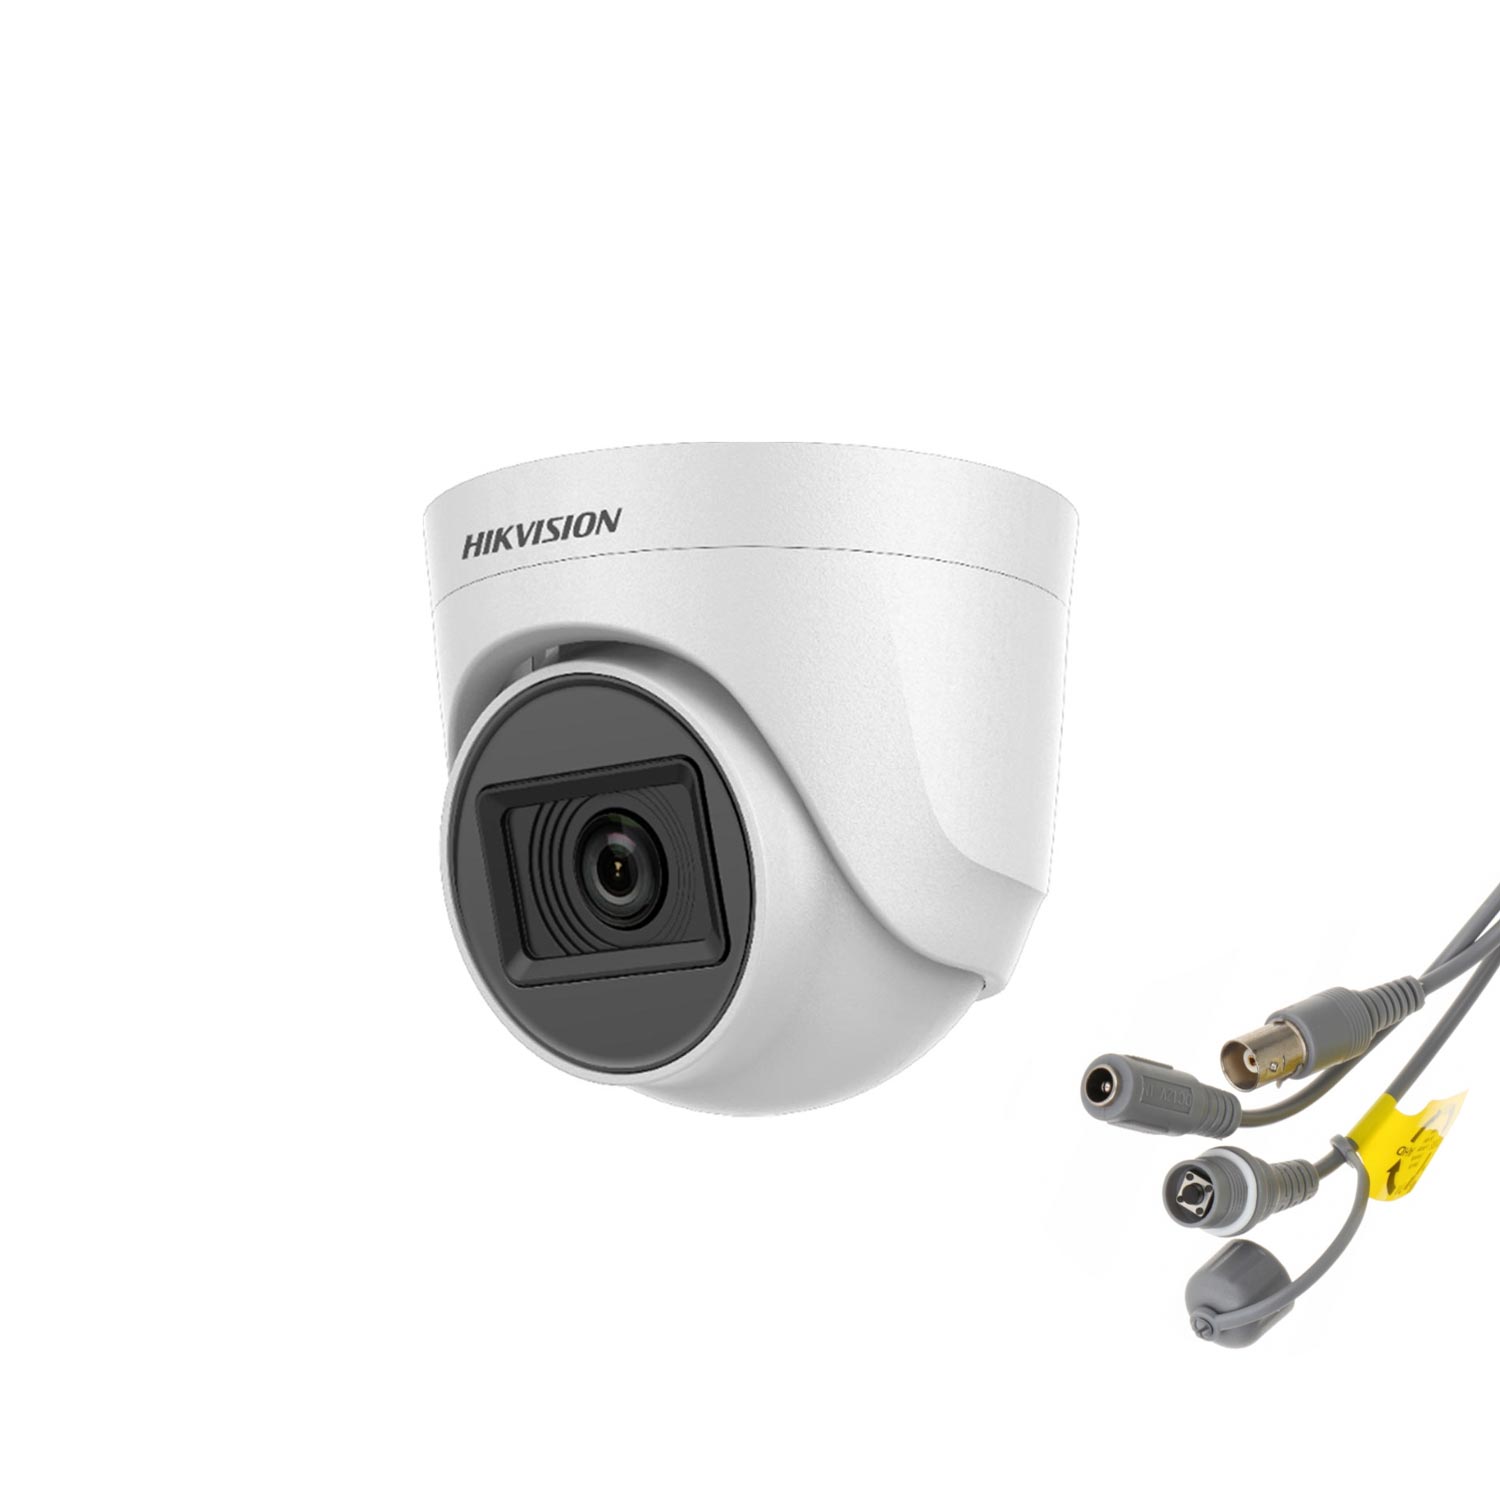 AHD KAMERA DOME TURBO 2MP 2.8MM 1080P HIKVISION DS-2CE76D0T-EXIPF